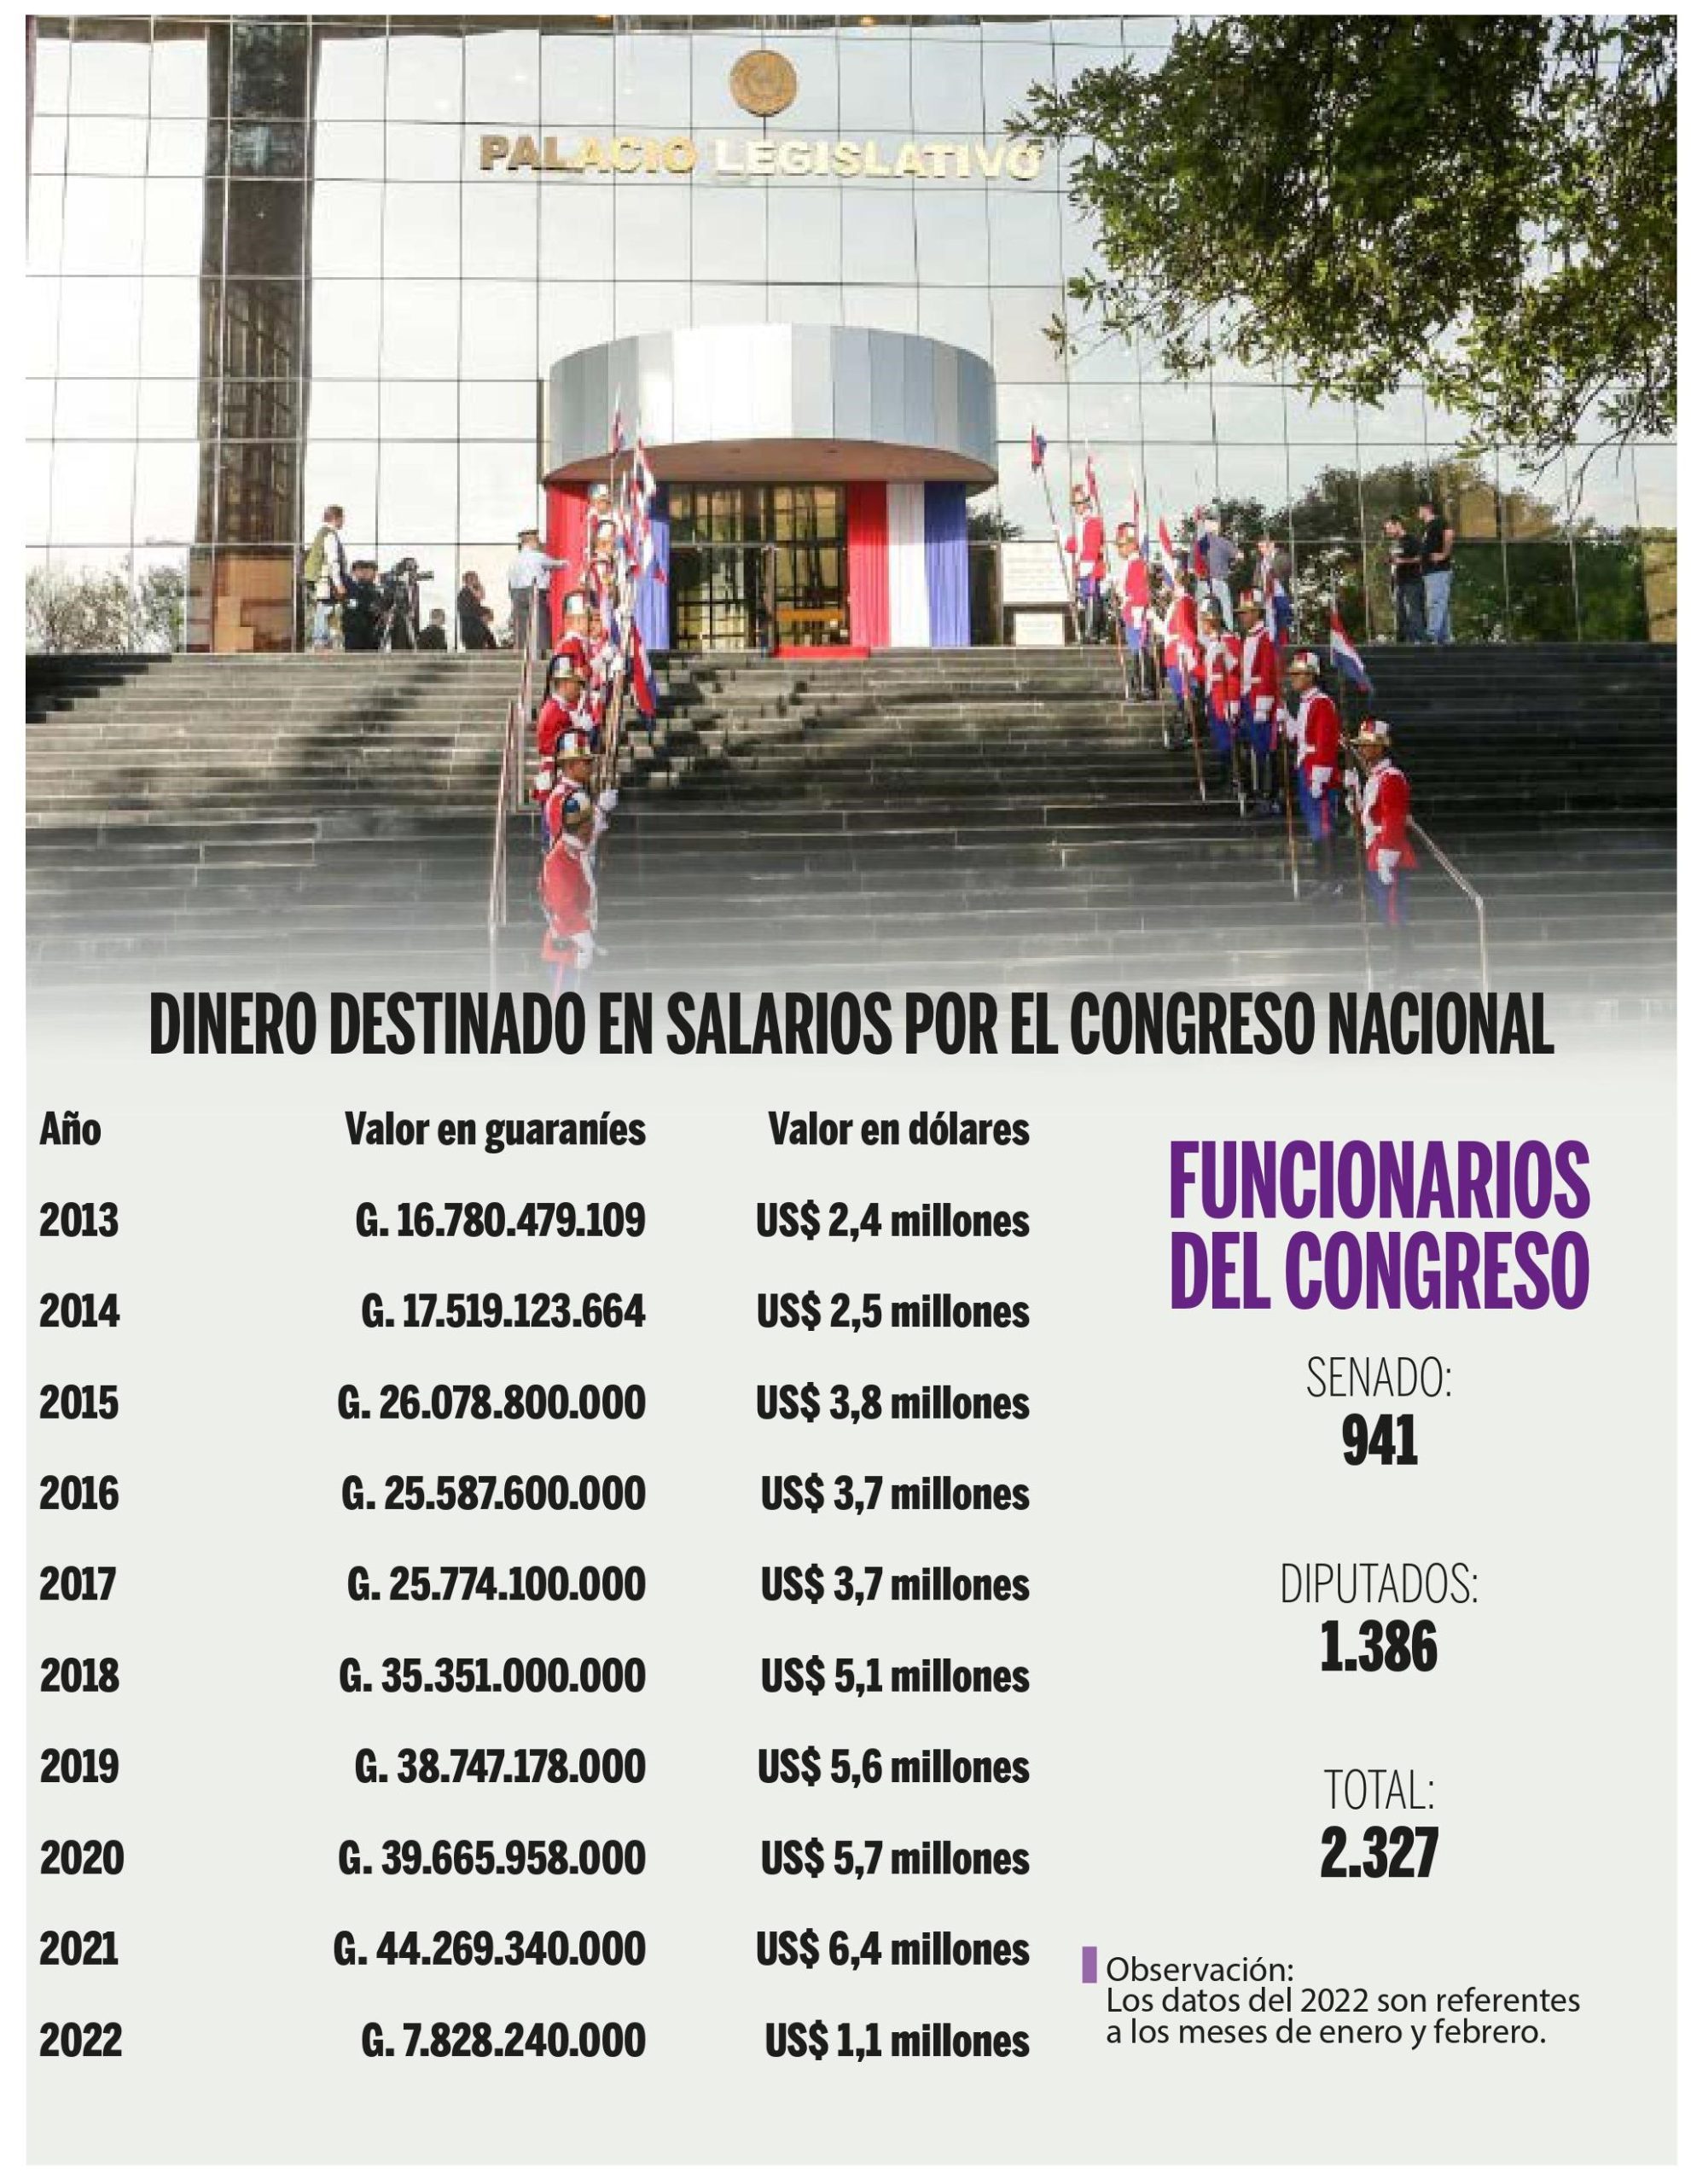 Some US$ 500,000 per month are allocated to salaries in the National Congress